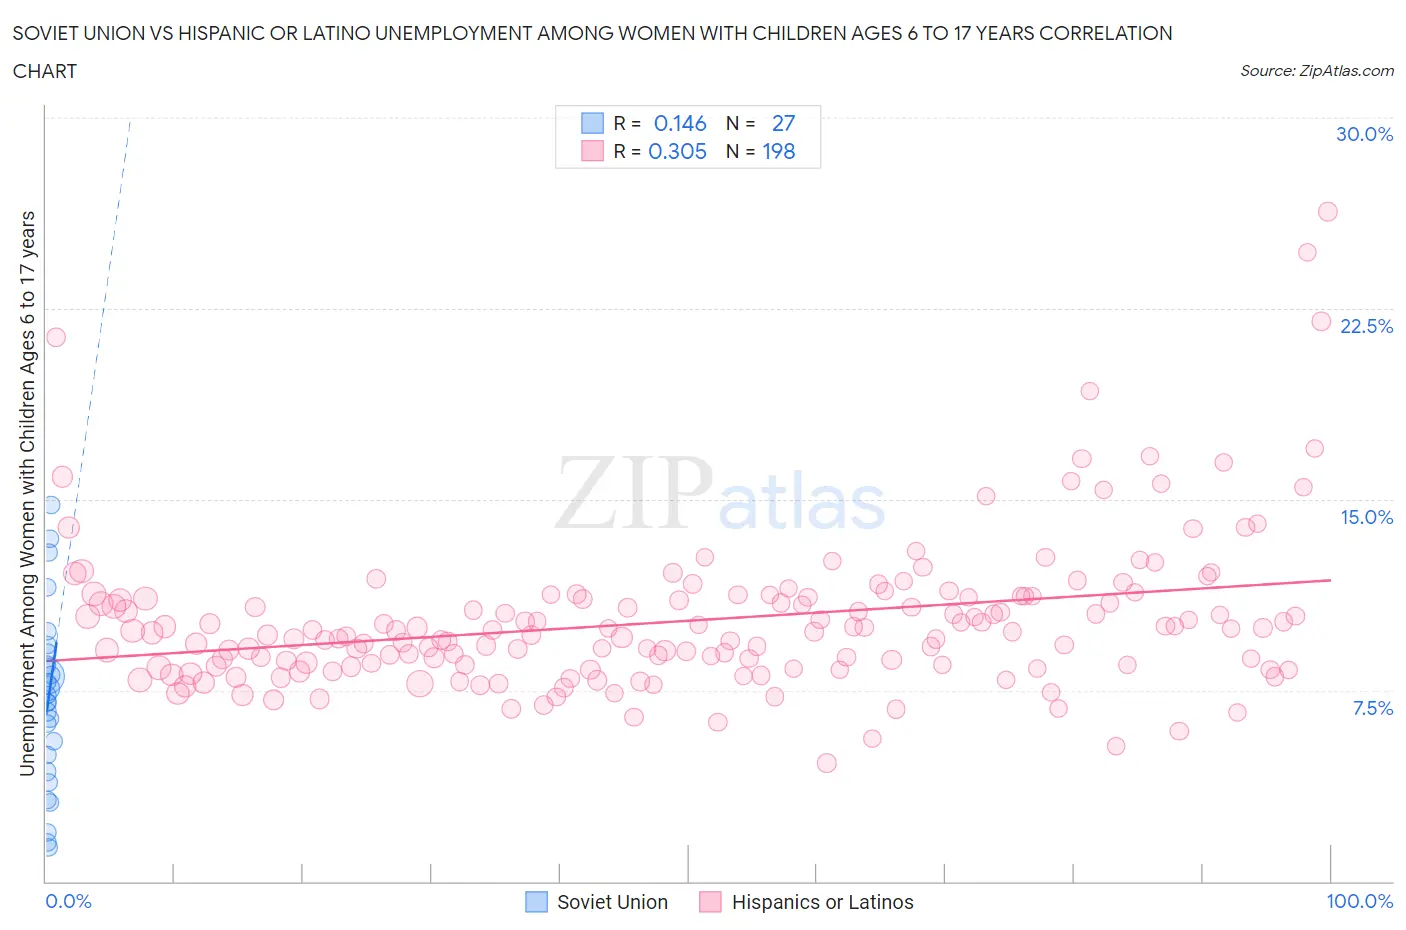 Soviet Union vs Hispanic or Latino Unemployment Among Women with Children Ages 6 to 17 years